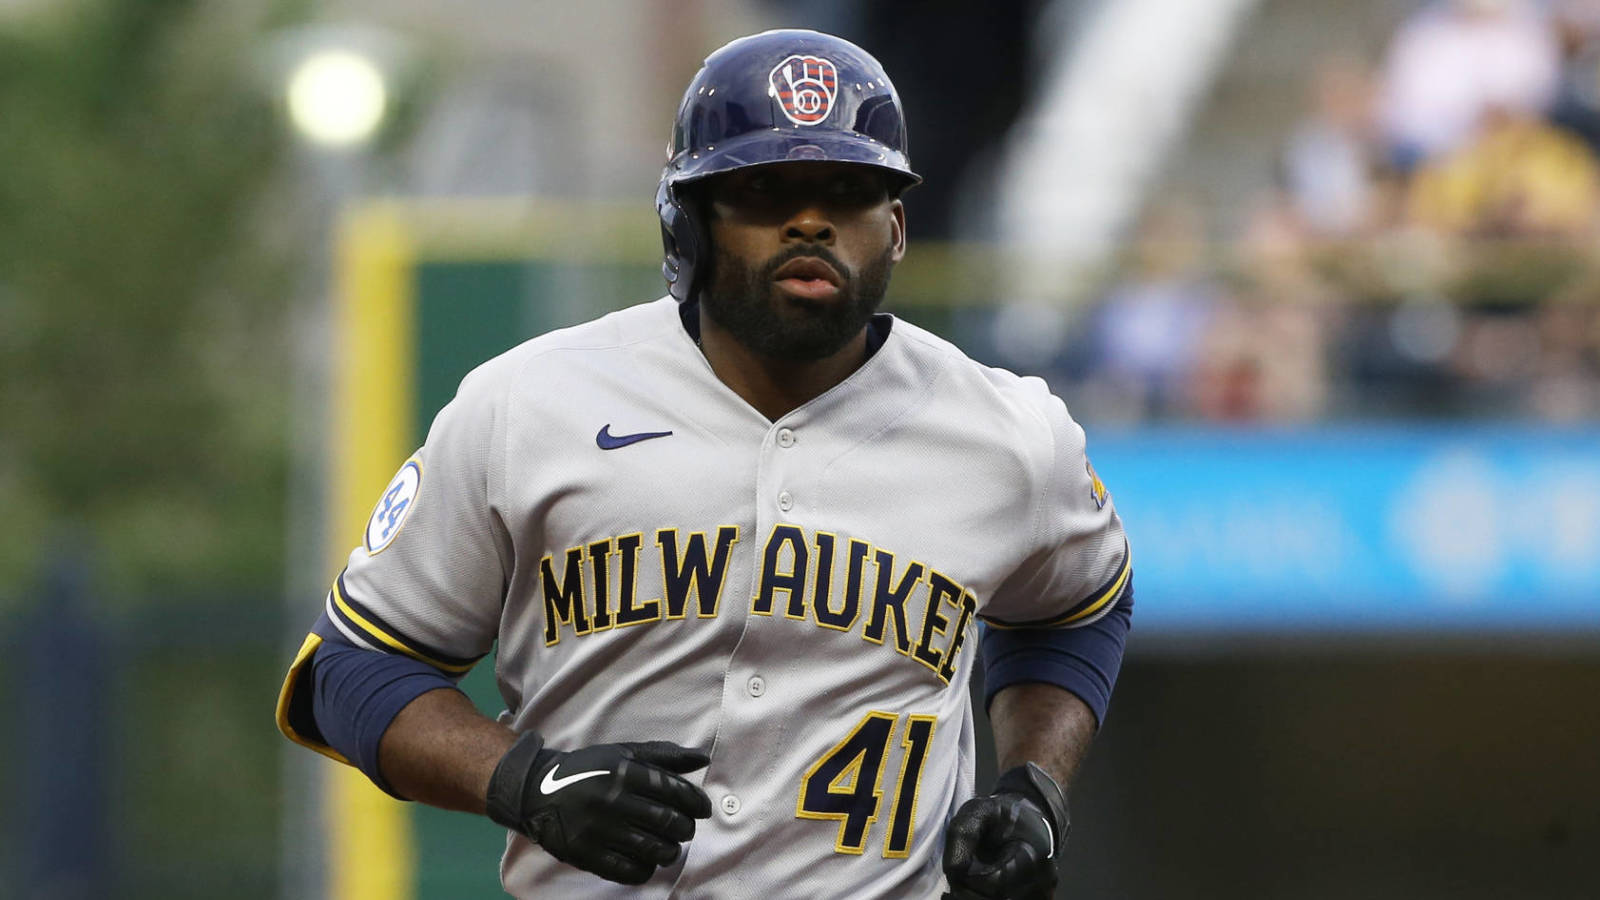 Red Sox reacquire one-time All-Star Jackie Bradley Jr., ship Hunter Renfroe to Brewers